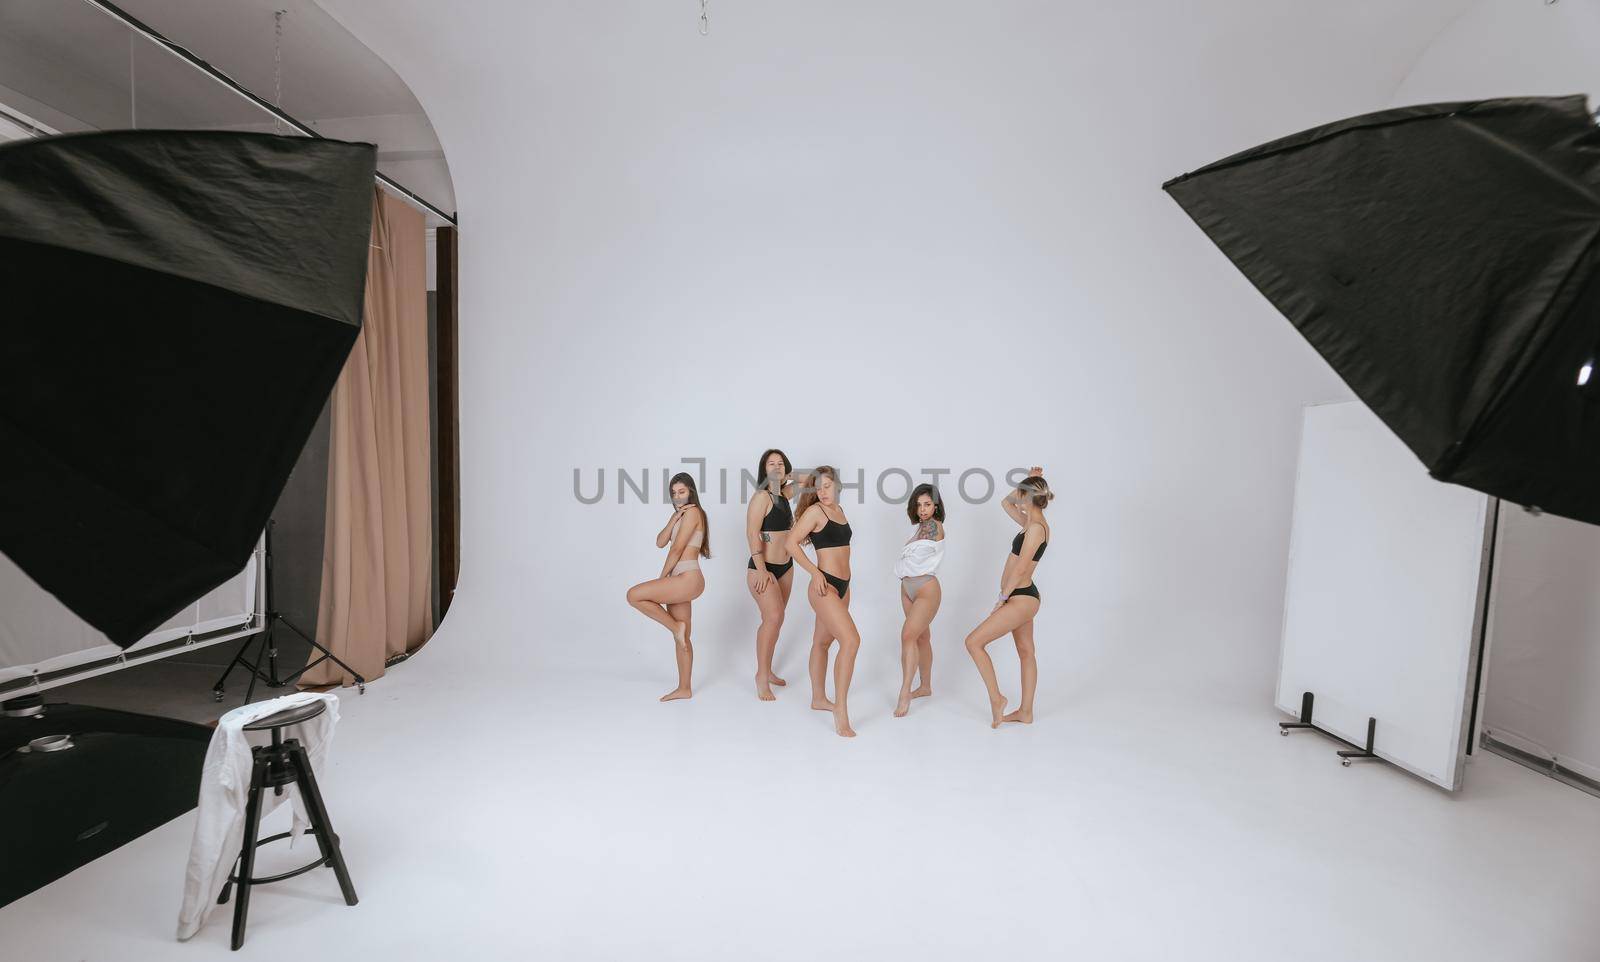 diverse models wearing comfortable underwear, enjoying time together, look at camera having smile and natural unique beauty